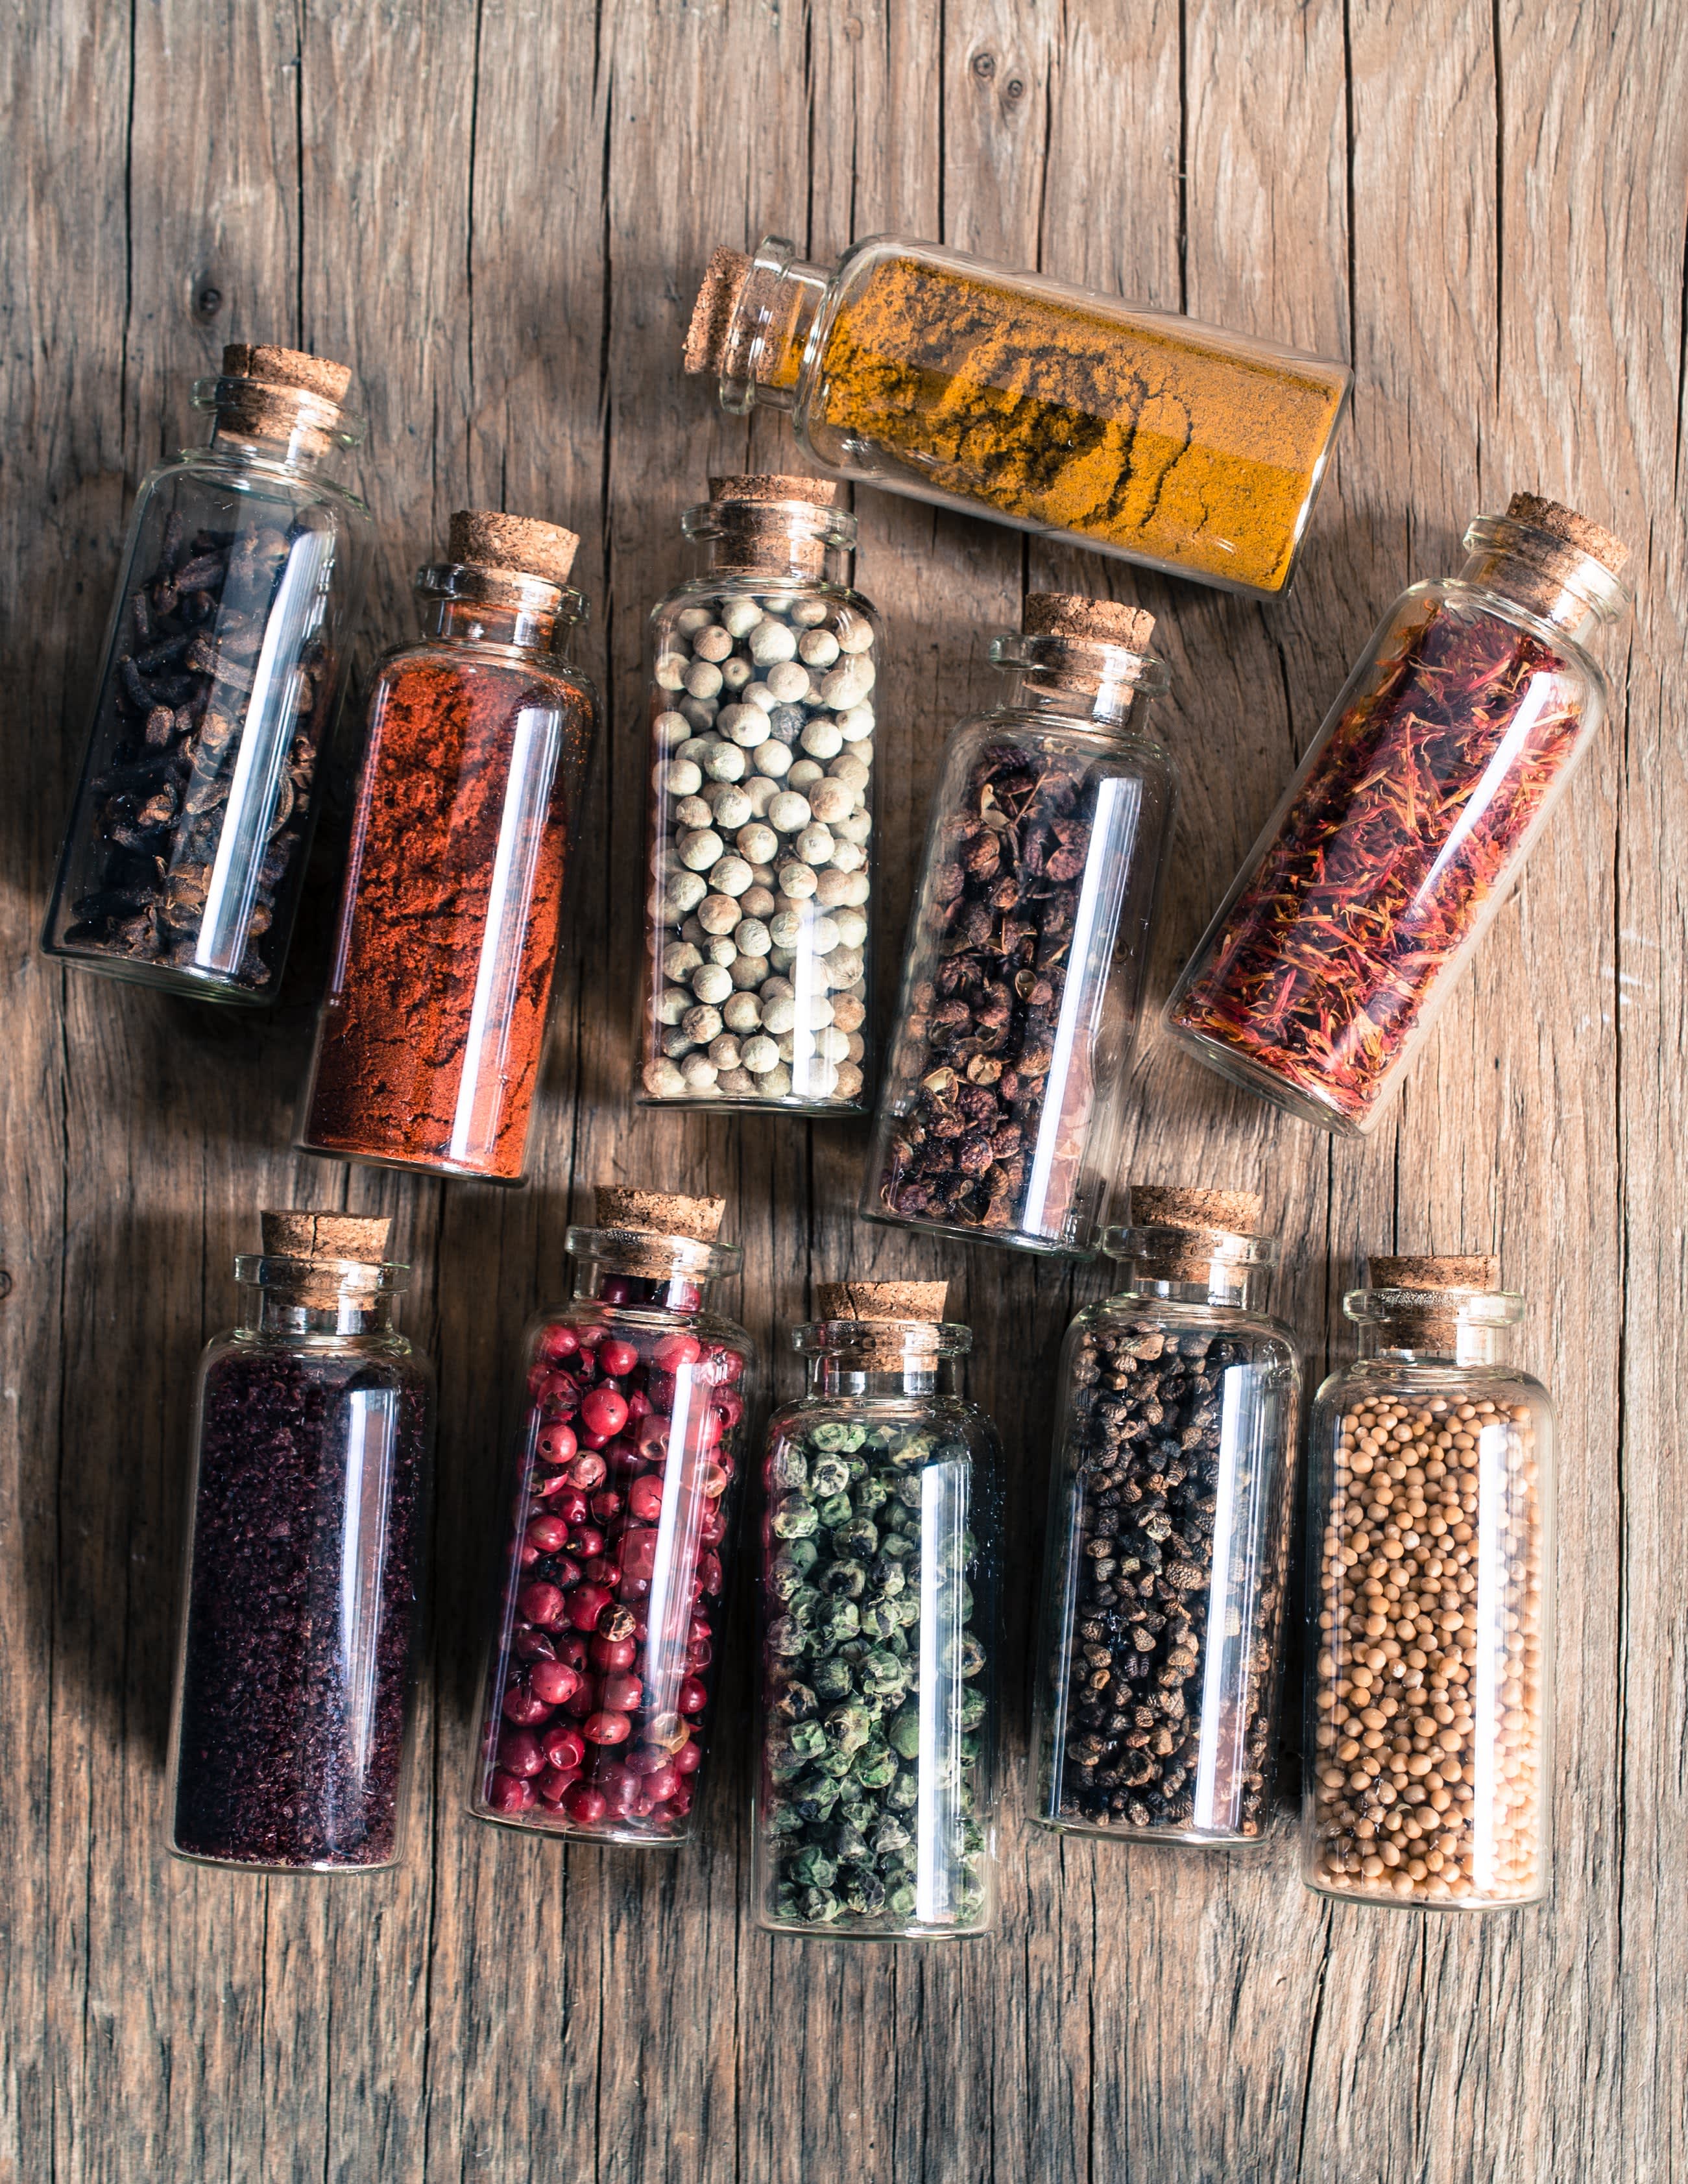 How to Give Discarded Spice Jars a New Life